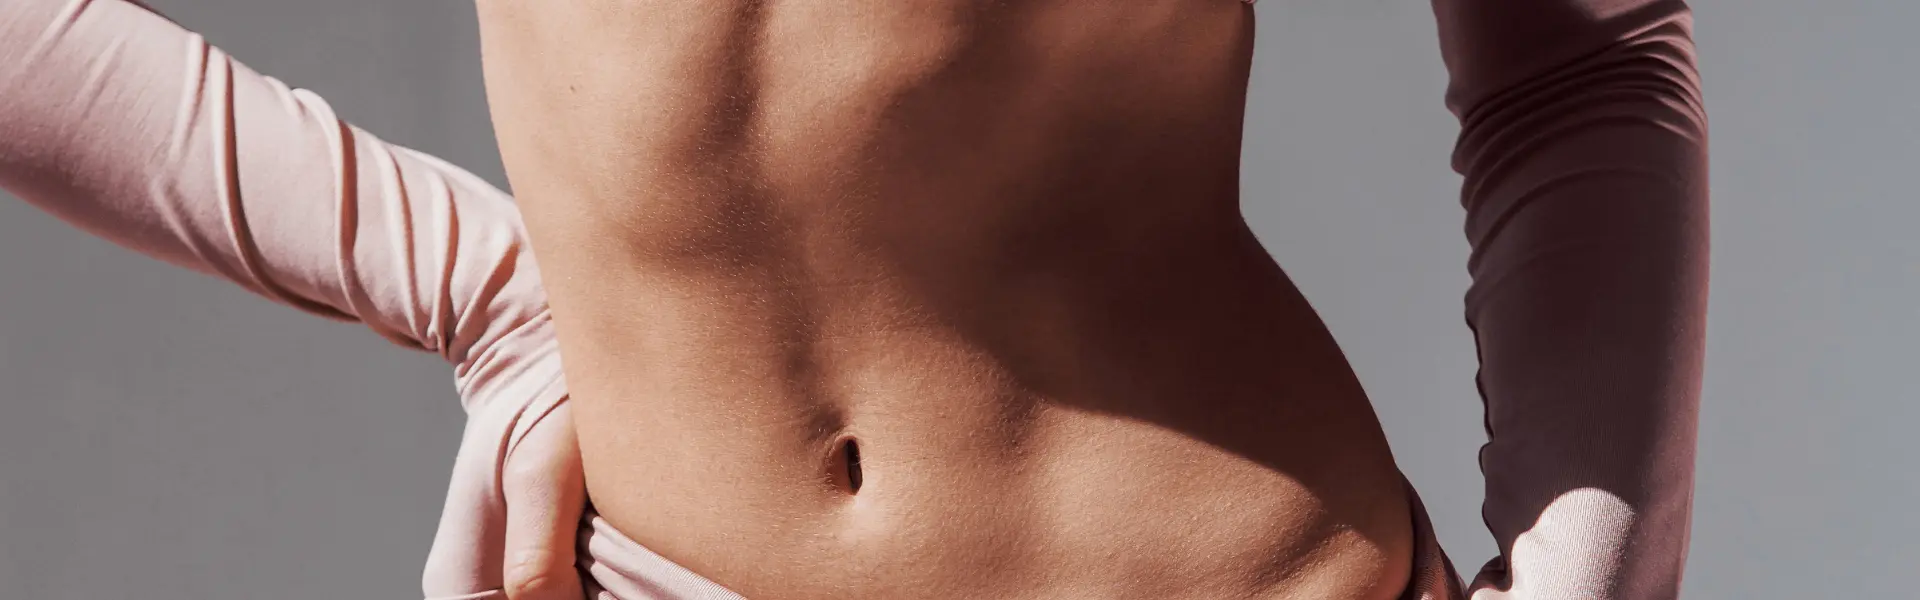 Body Contouring NYC  Personalized Cosmetic Procedure Plans